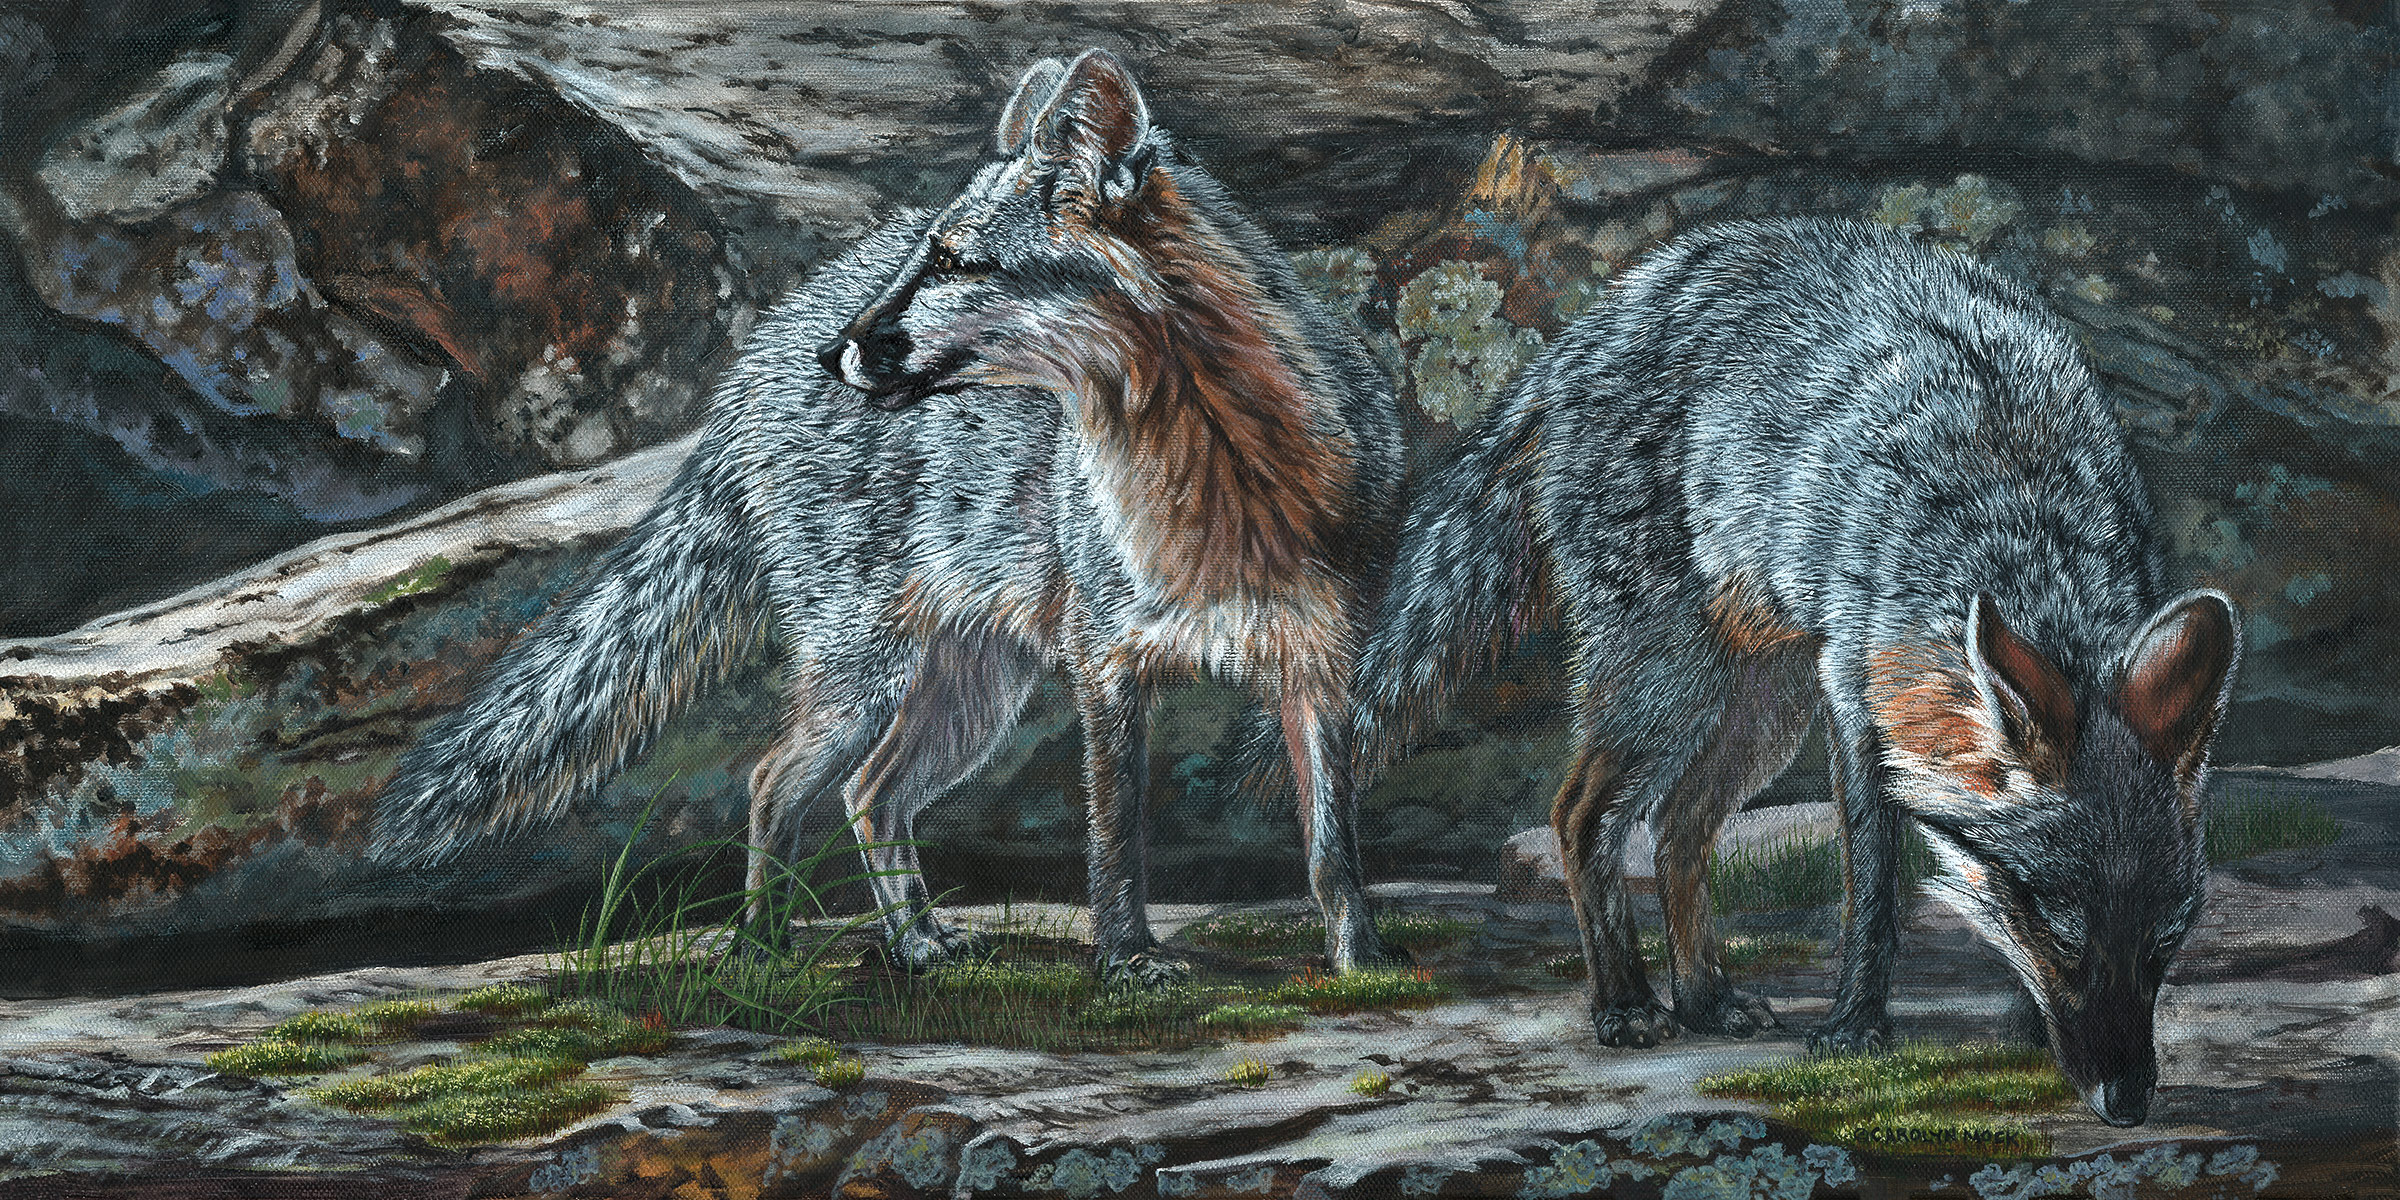 A pair of wolves explore a rocky area